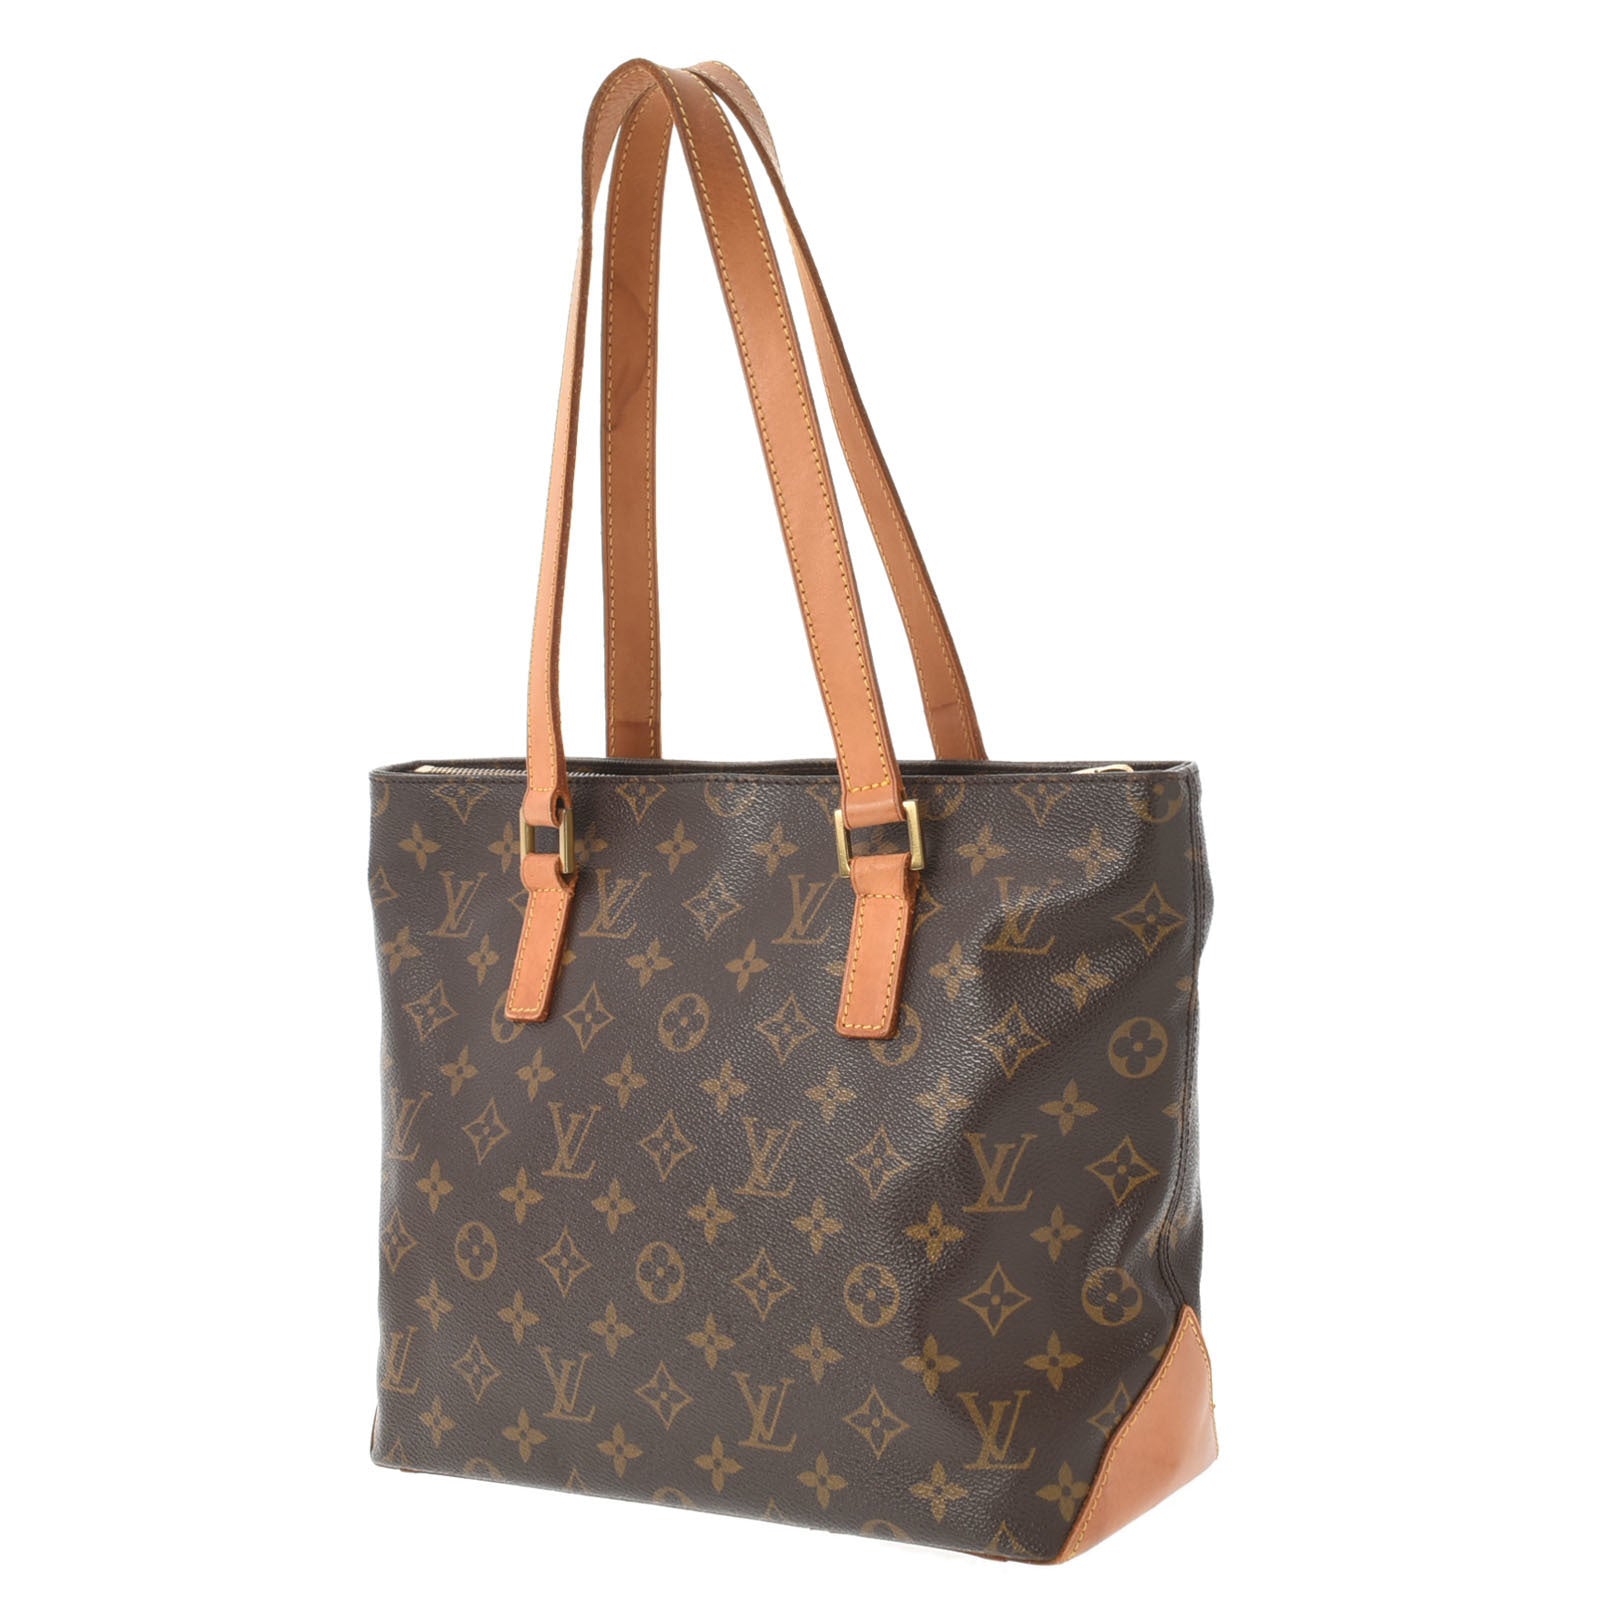 AUTHENTIC* LOUIS VUITTON CABAS PIANO BAG (Discontinued), Luxury